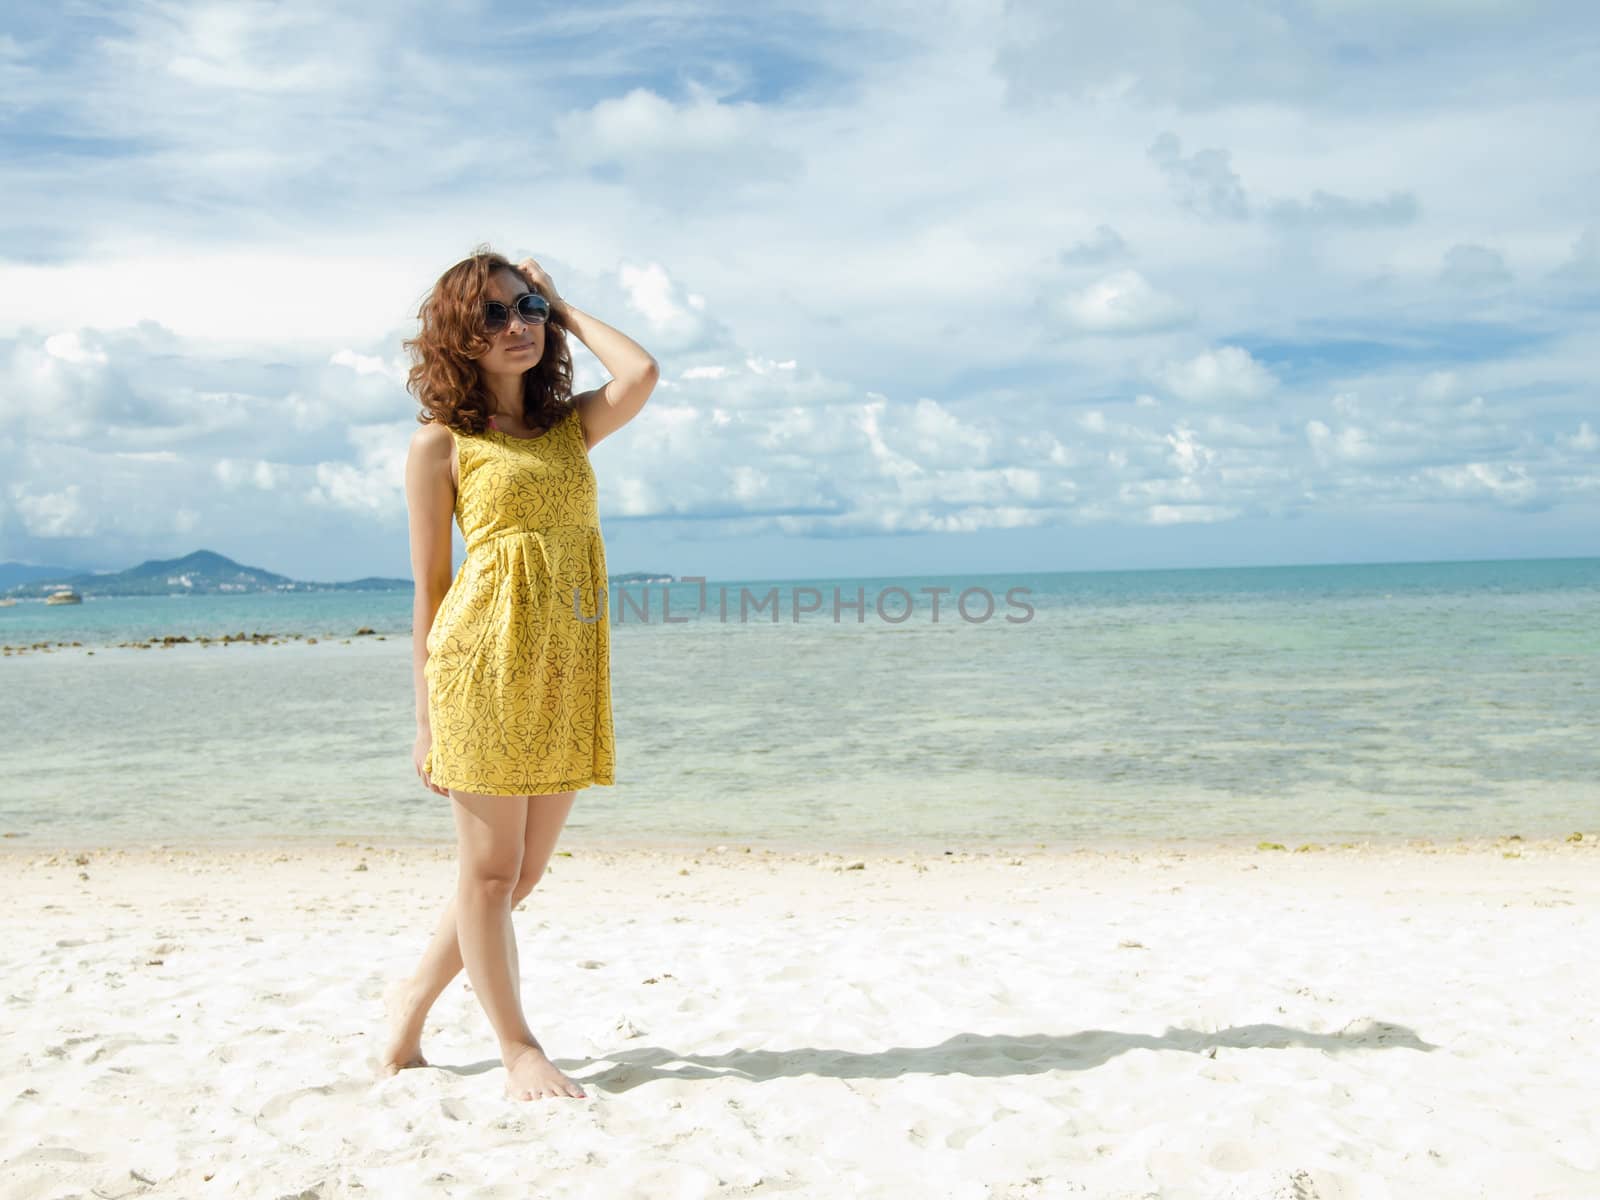 Asian Women on the Beach with vibrant yellow dress